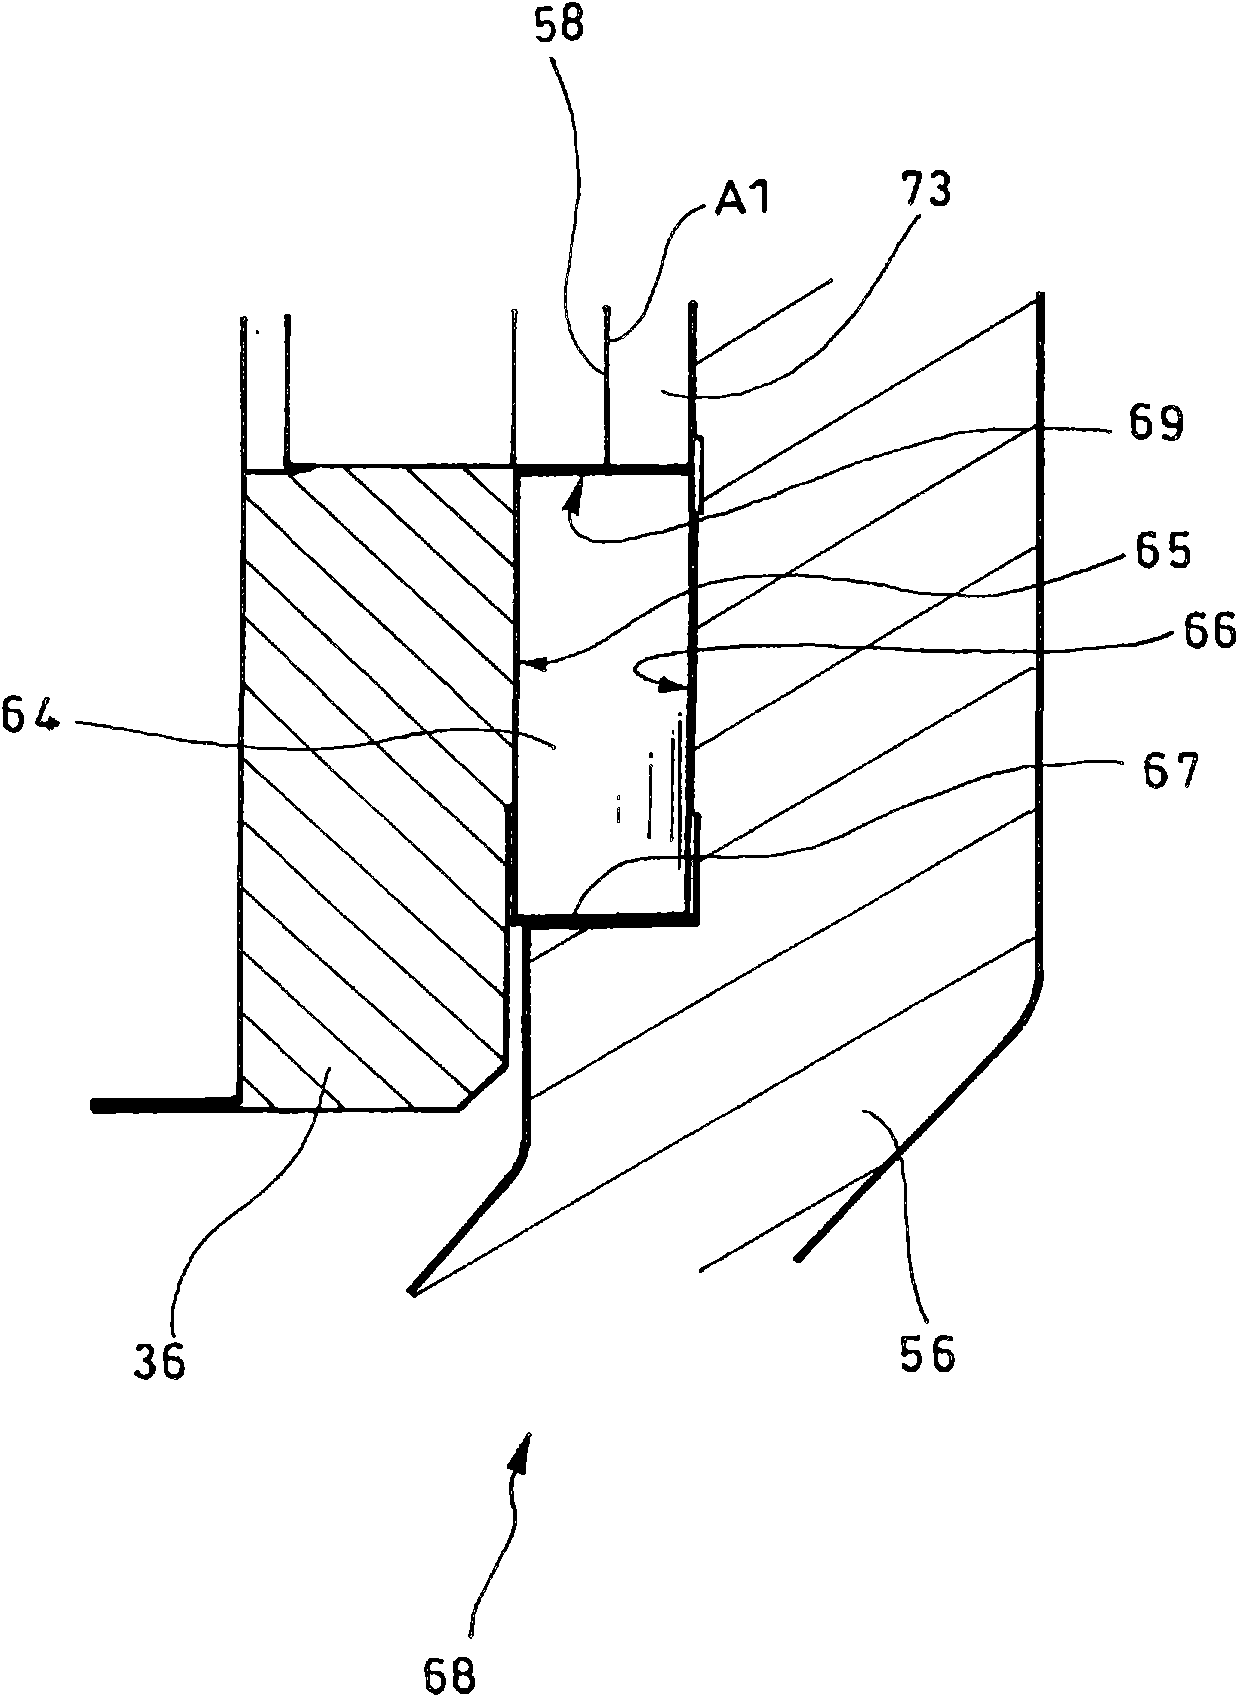 Reduction gear for natural energy recovery system